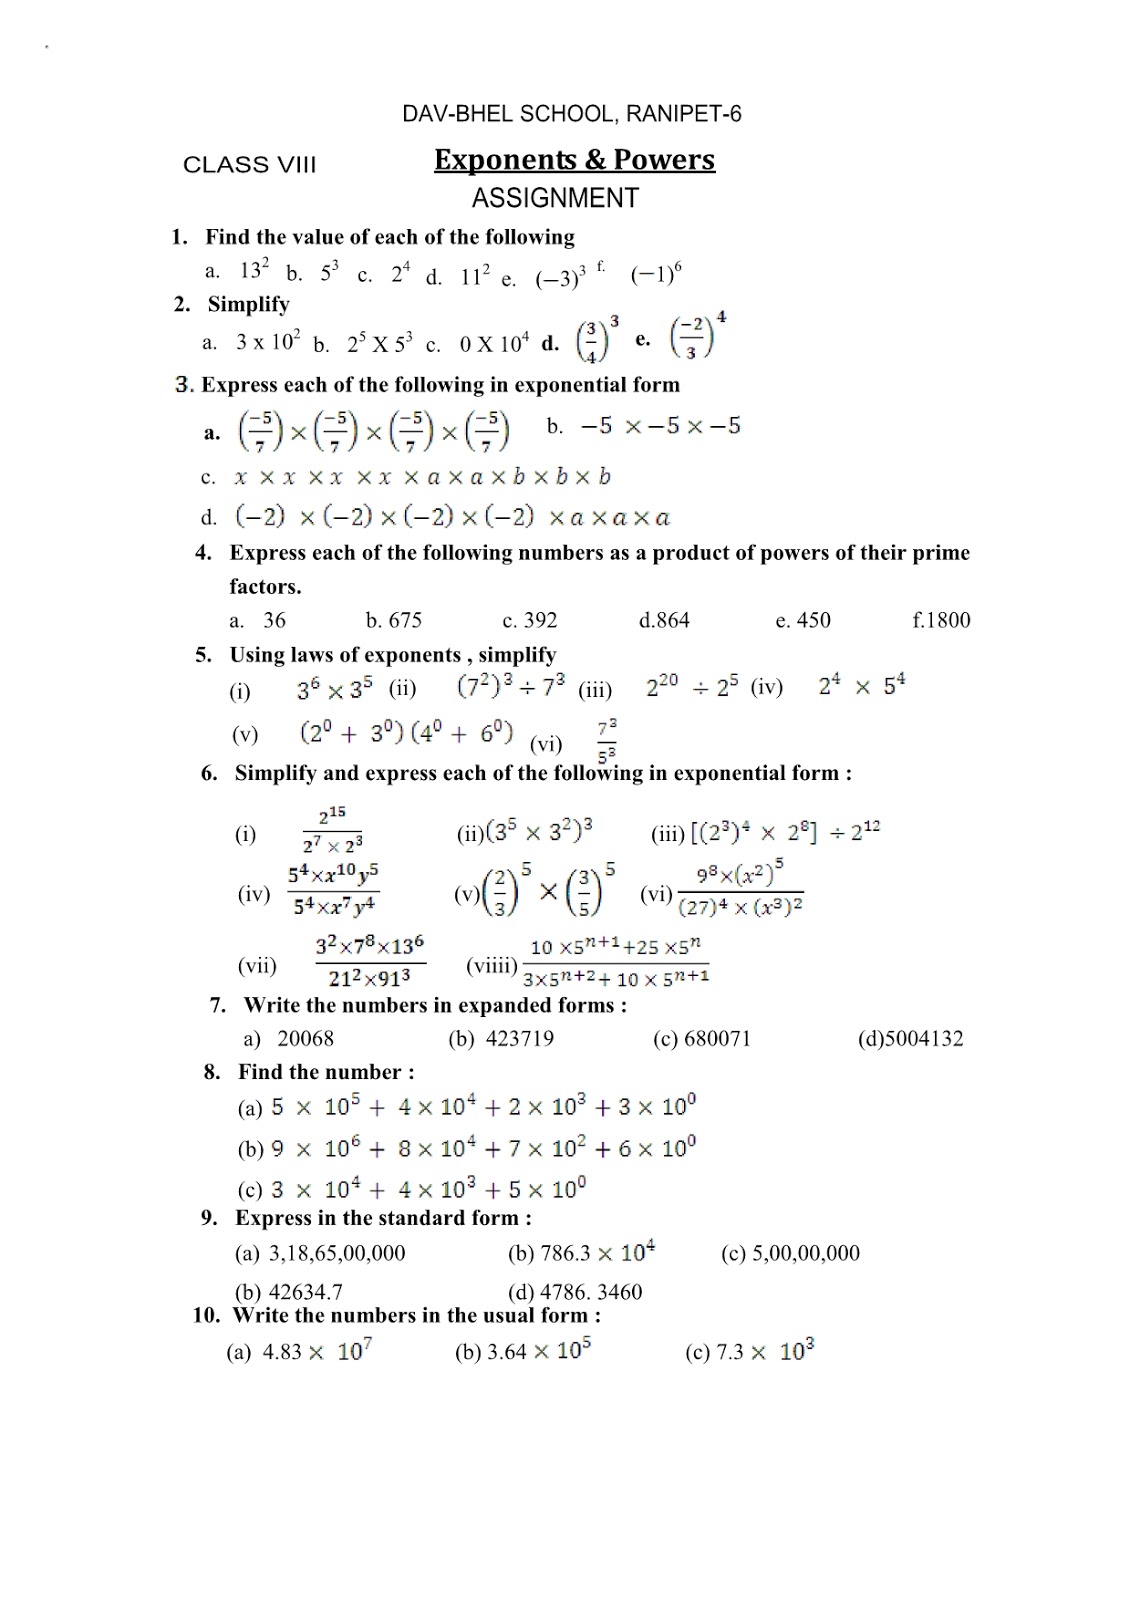 cbse-math-8th-exponents-powers-worksheet